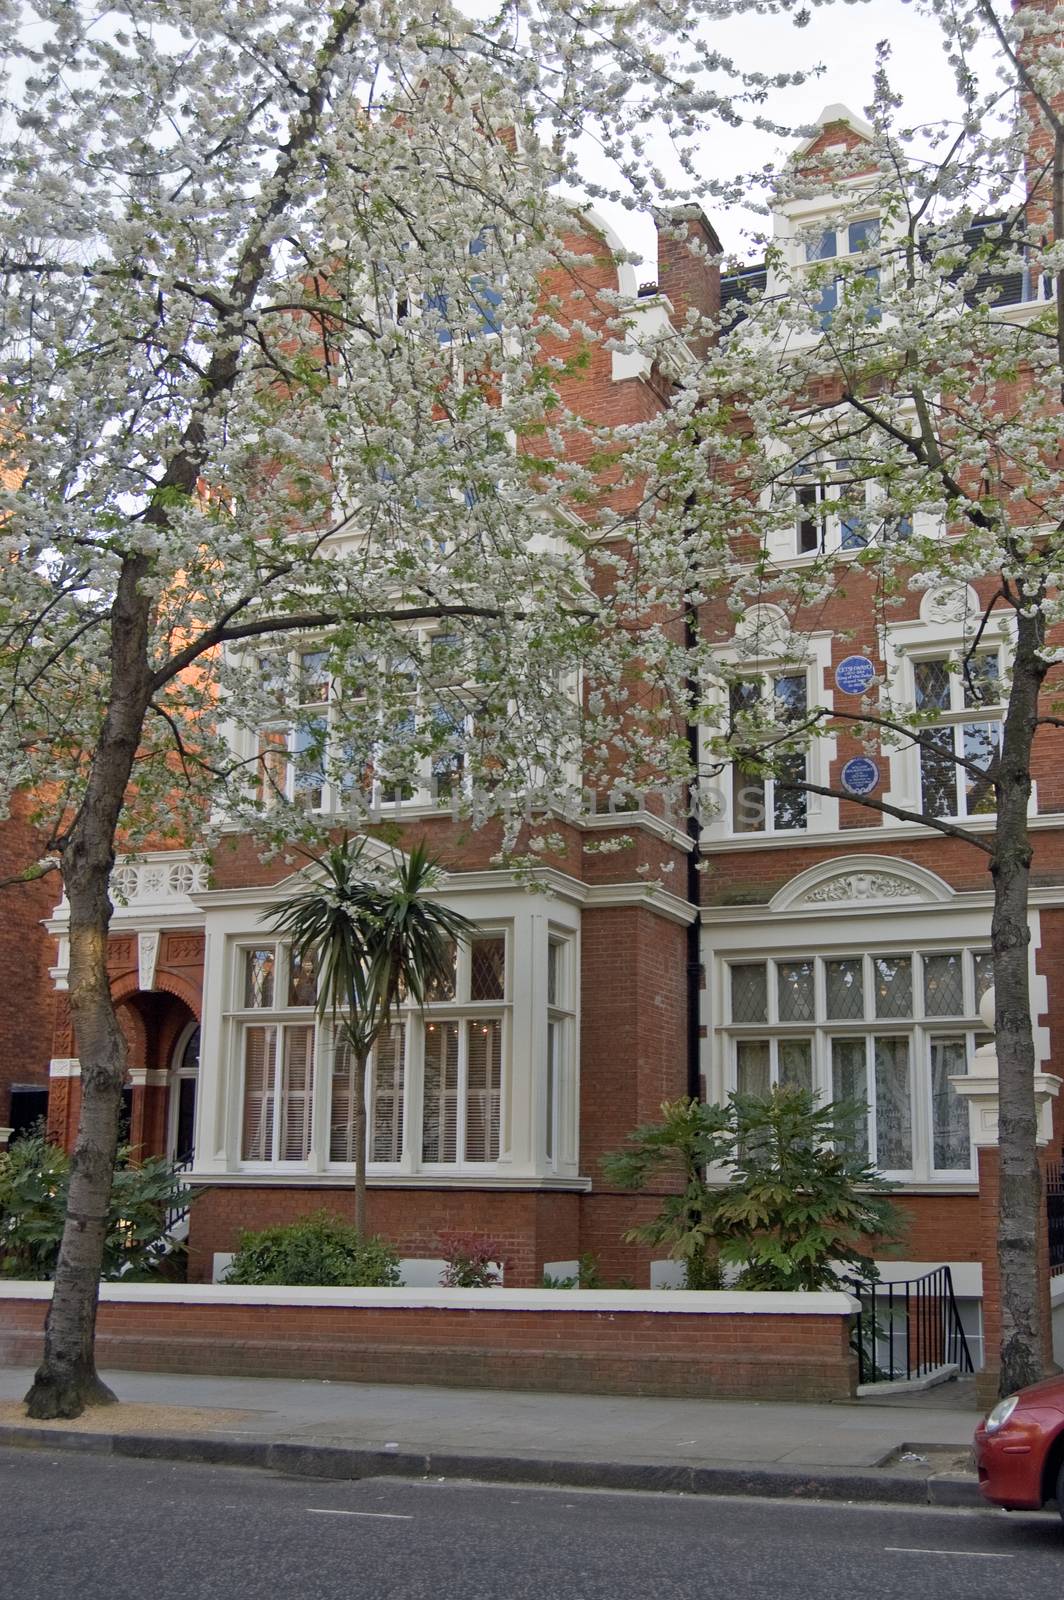 London, UK - April 10, 2011:  This Victorian house was the home of Cetshwayo, King of the Zulus (1832-1884). Also the renowned pre-raphaelite artist William Holman Hunt (1827 - 1910) lived and died here. Kensington, West London.